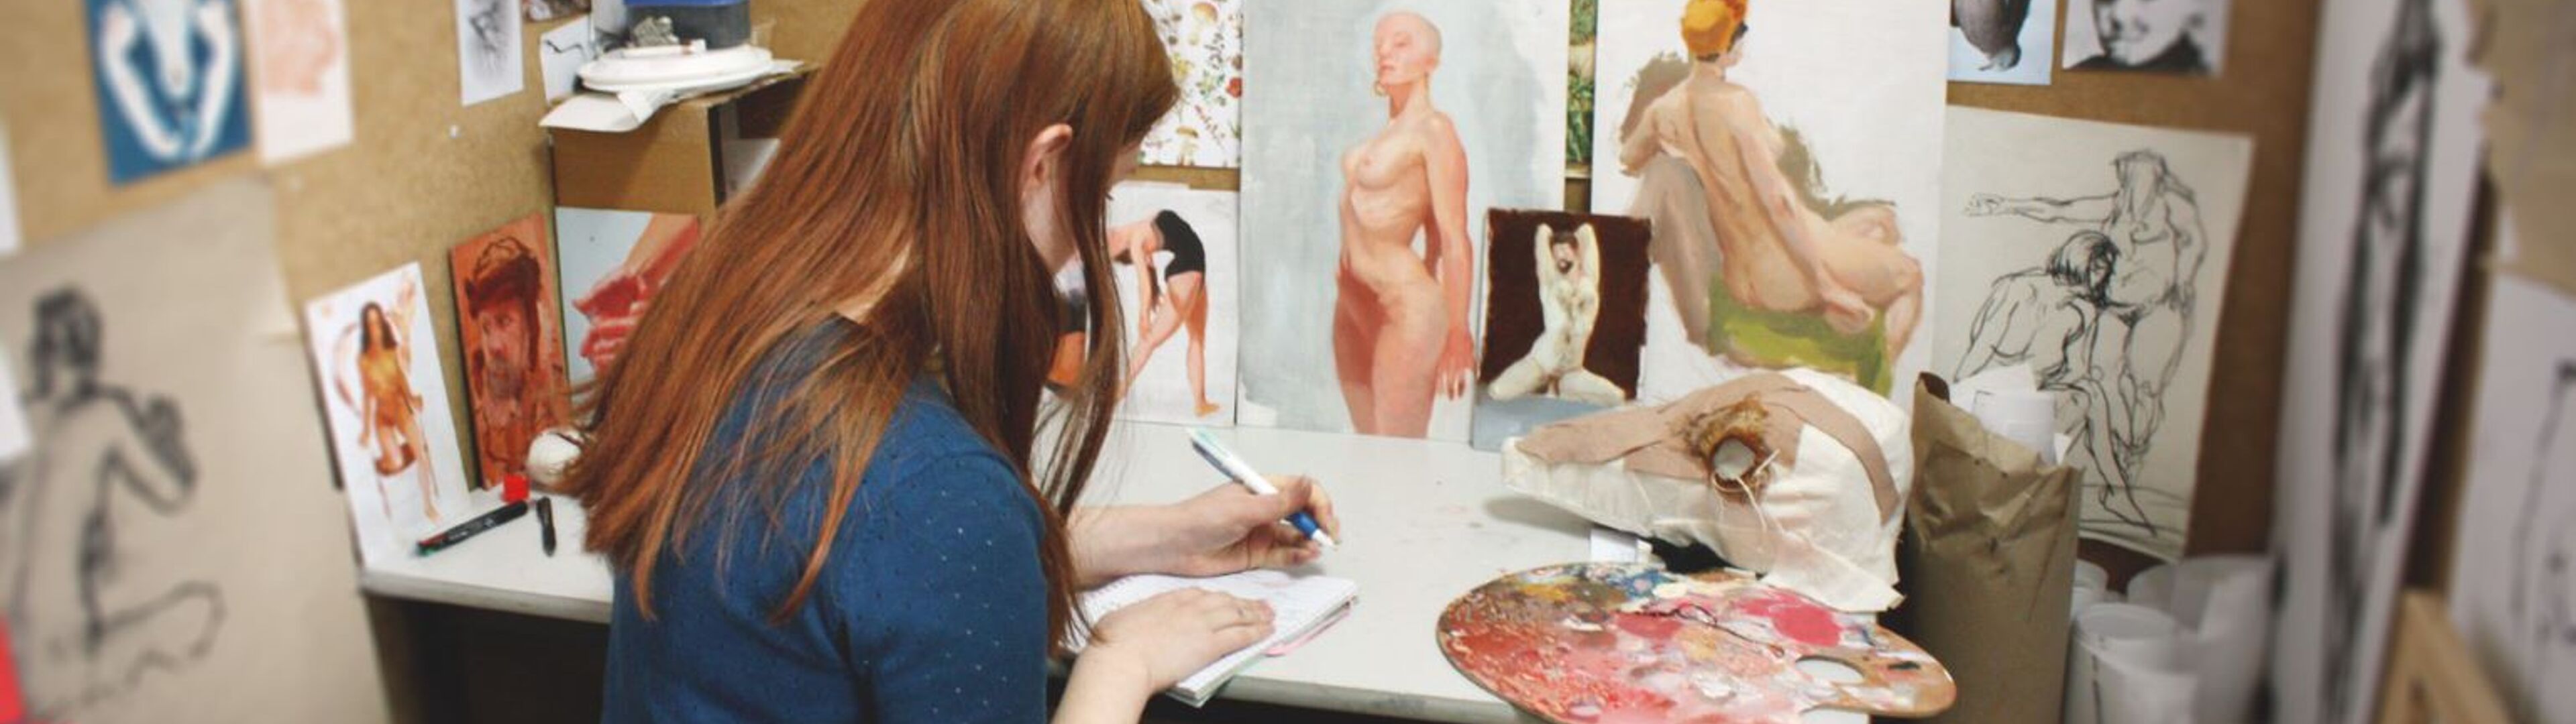 An artist lost in concentration sketches in her studio, her fiery hair mirroring the passion of her work.